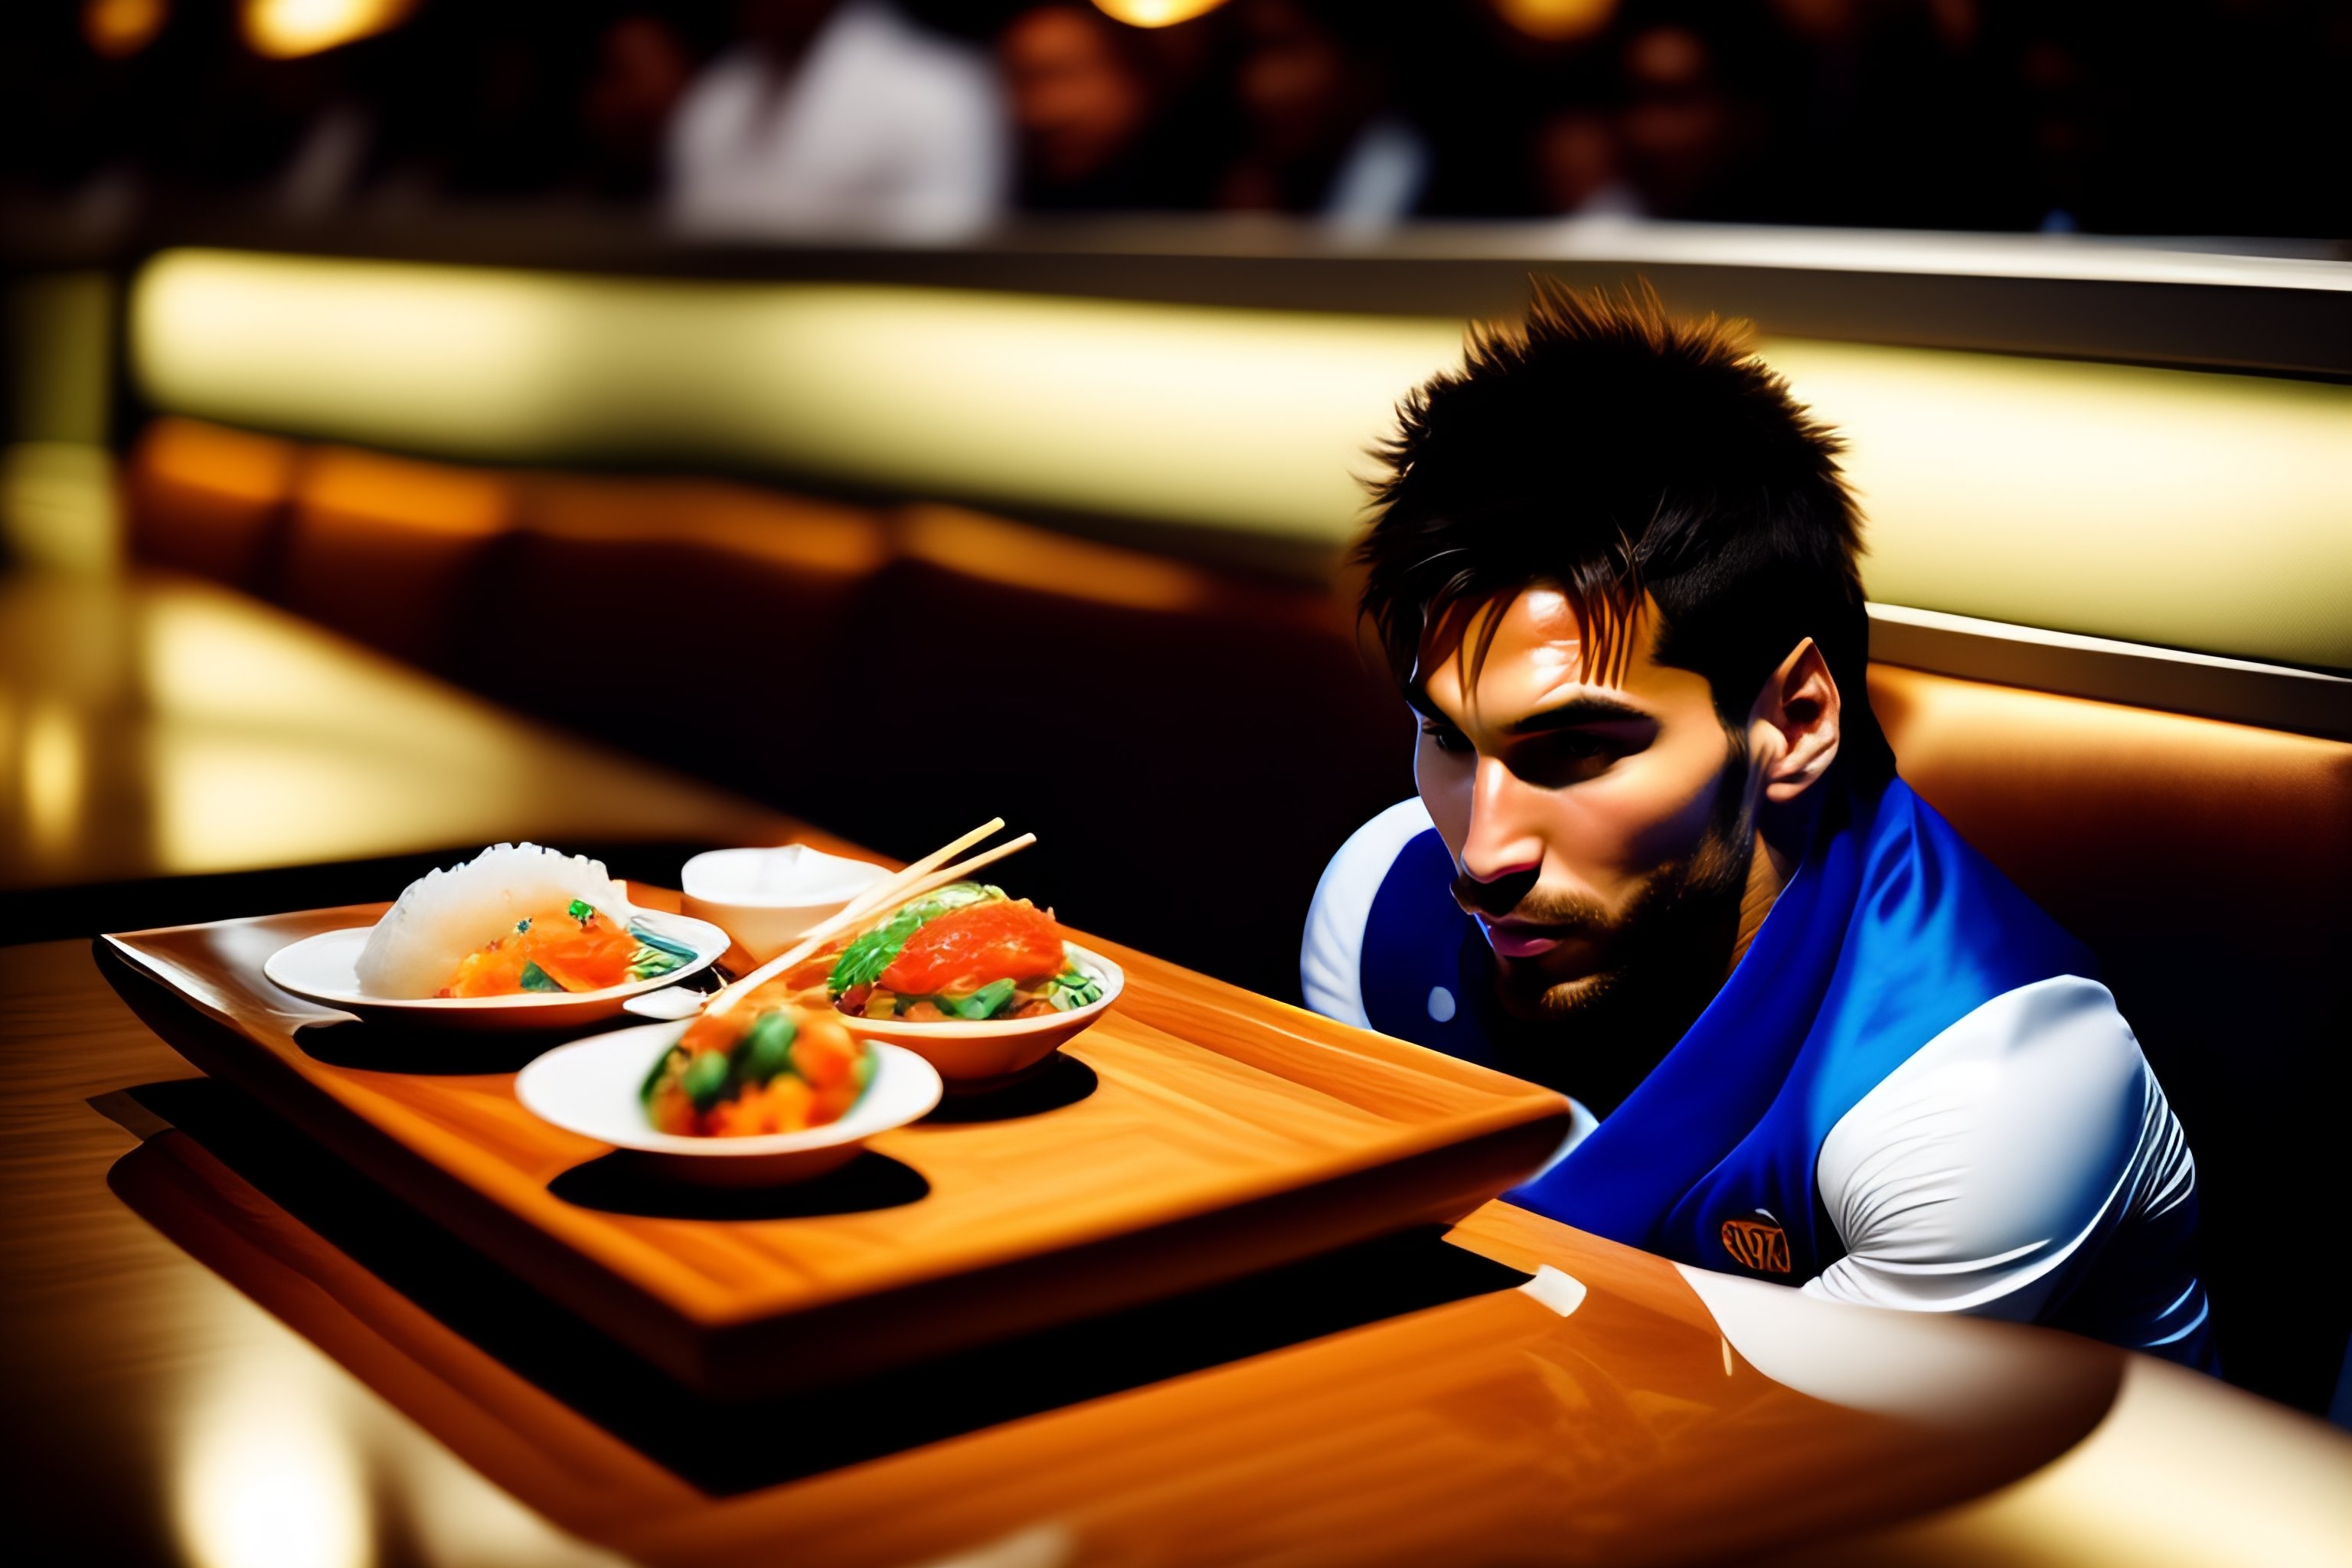 Lexica - Leonel Messi eating sushi